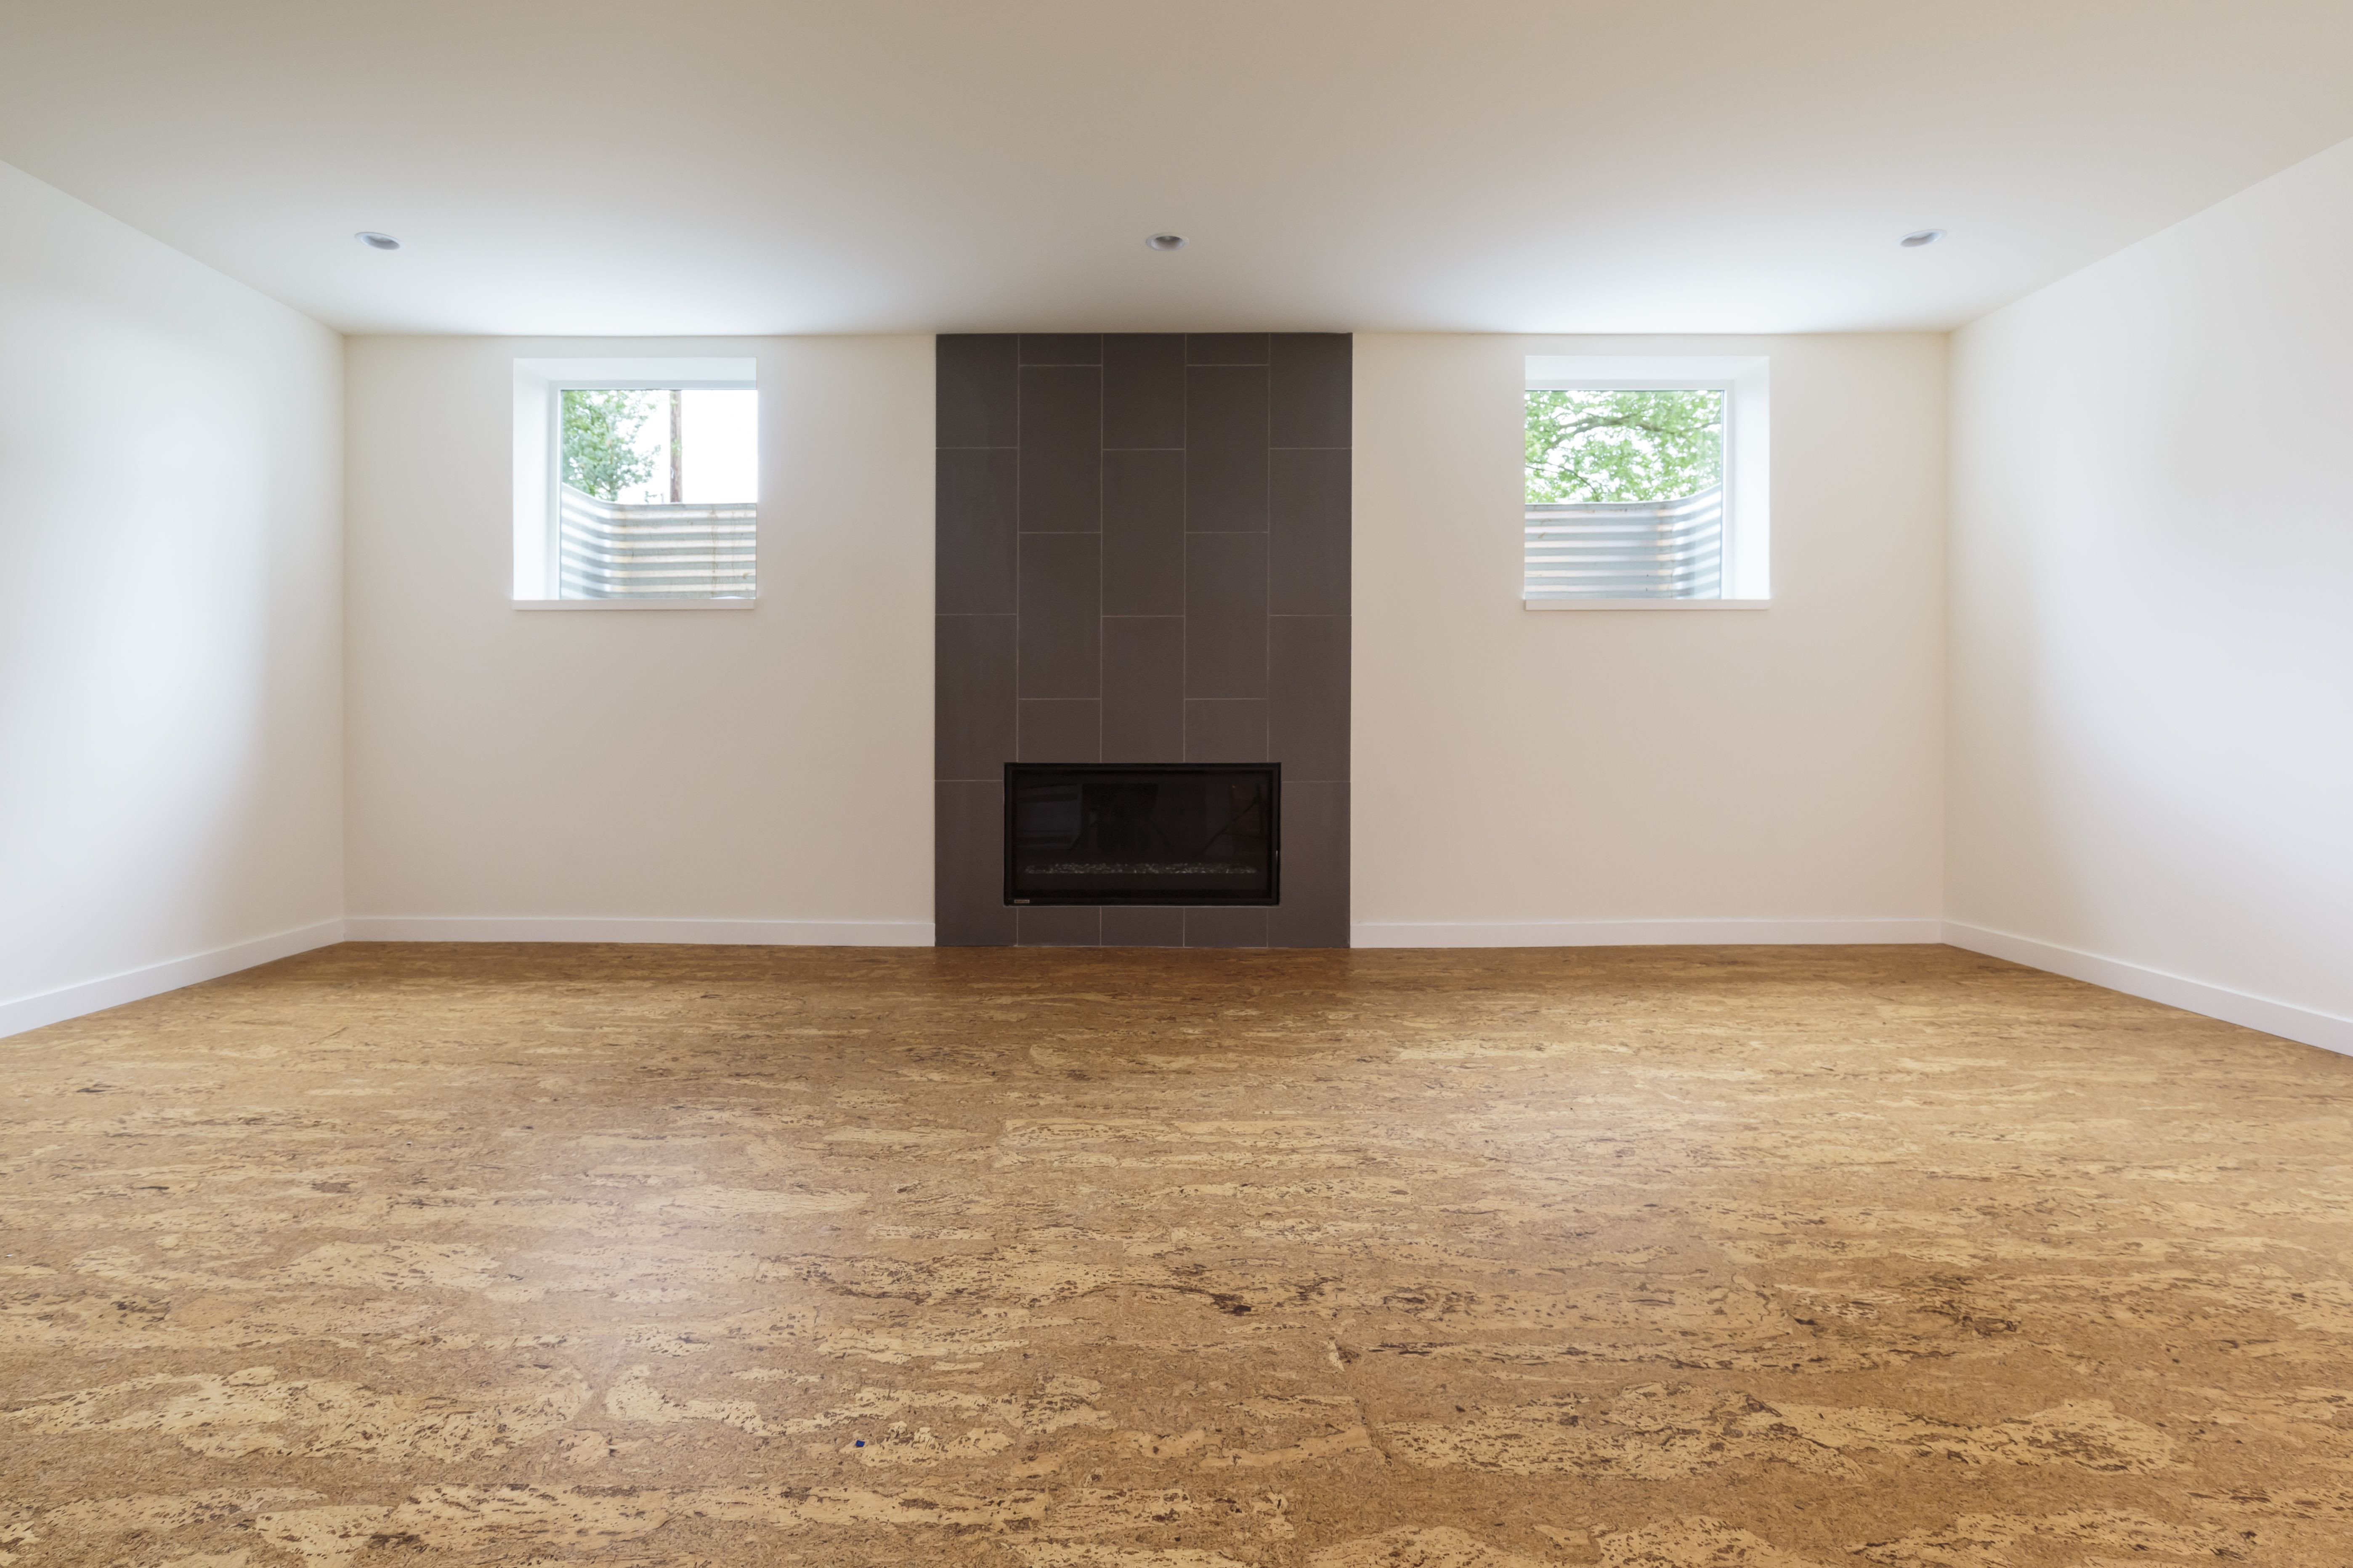 29 Lovely Hardwood Floors or Carpet In Bedrooms 2024 free download hardwood floors or carpet in bedrooms of the best flooring options for senior citizens within cork flooring in an unfurnished home